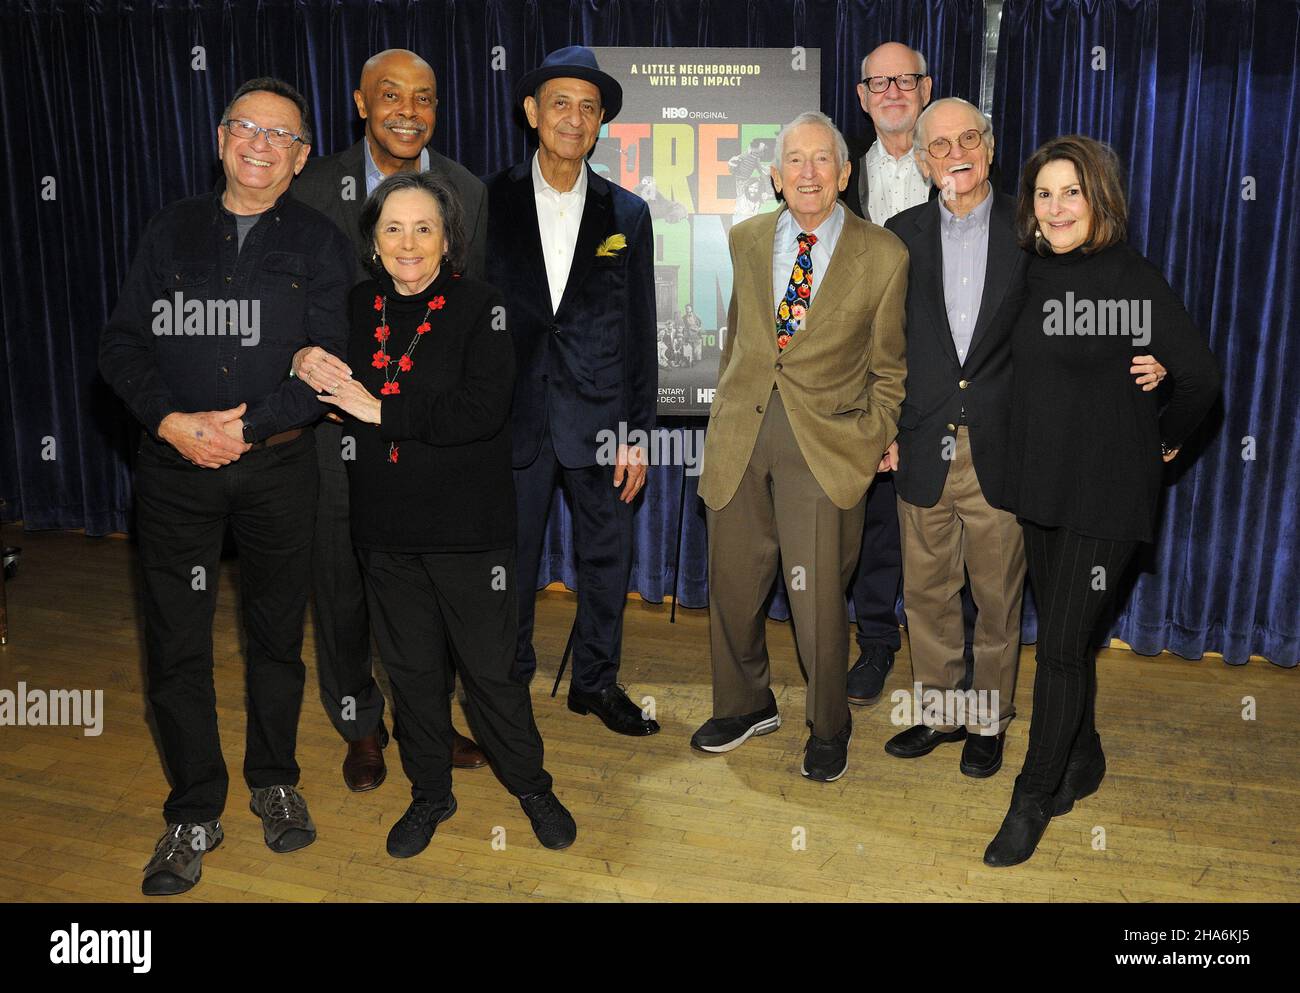 New York, USA. 10th Dec, 2021. L-R: Norman Stiles, NA, Roscoe Orman, Emilio Delgado, Bob McGrath, Frank Oz, Christopher Cerf and Sharon Lerner attend the NY special screening of Street Gang: How We Got To Sesame Street at Symphony Space in New York, NY on December 10, 2021. (Photo by Stephen Smith/SIPA USA) Credit: Sipa USA/Alamy Live News Stock Photo